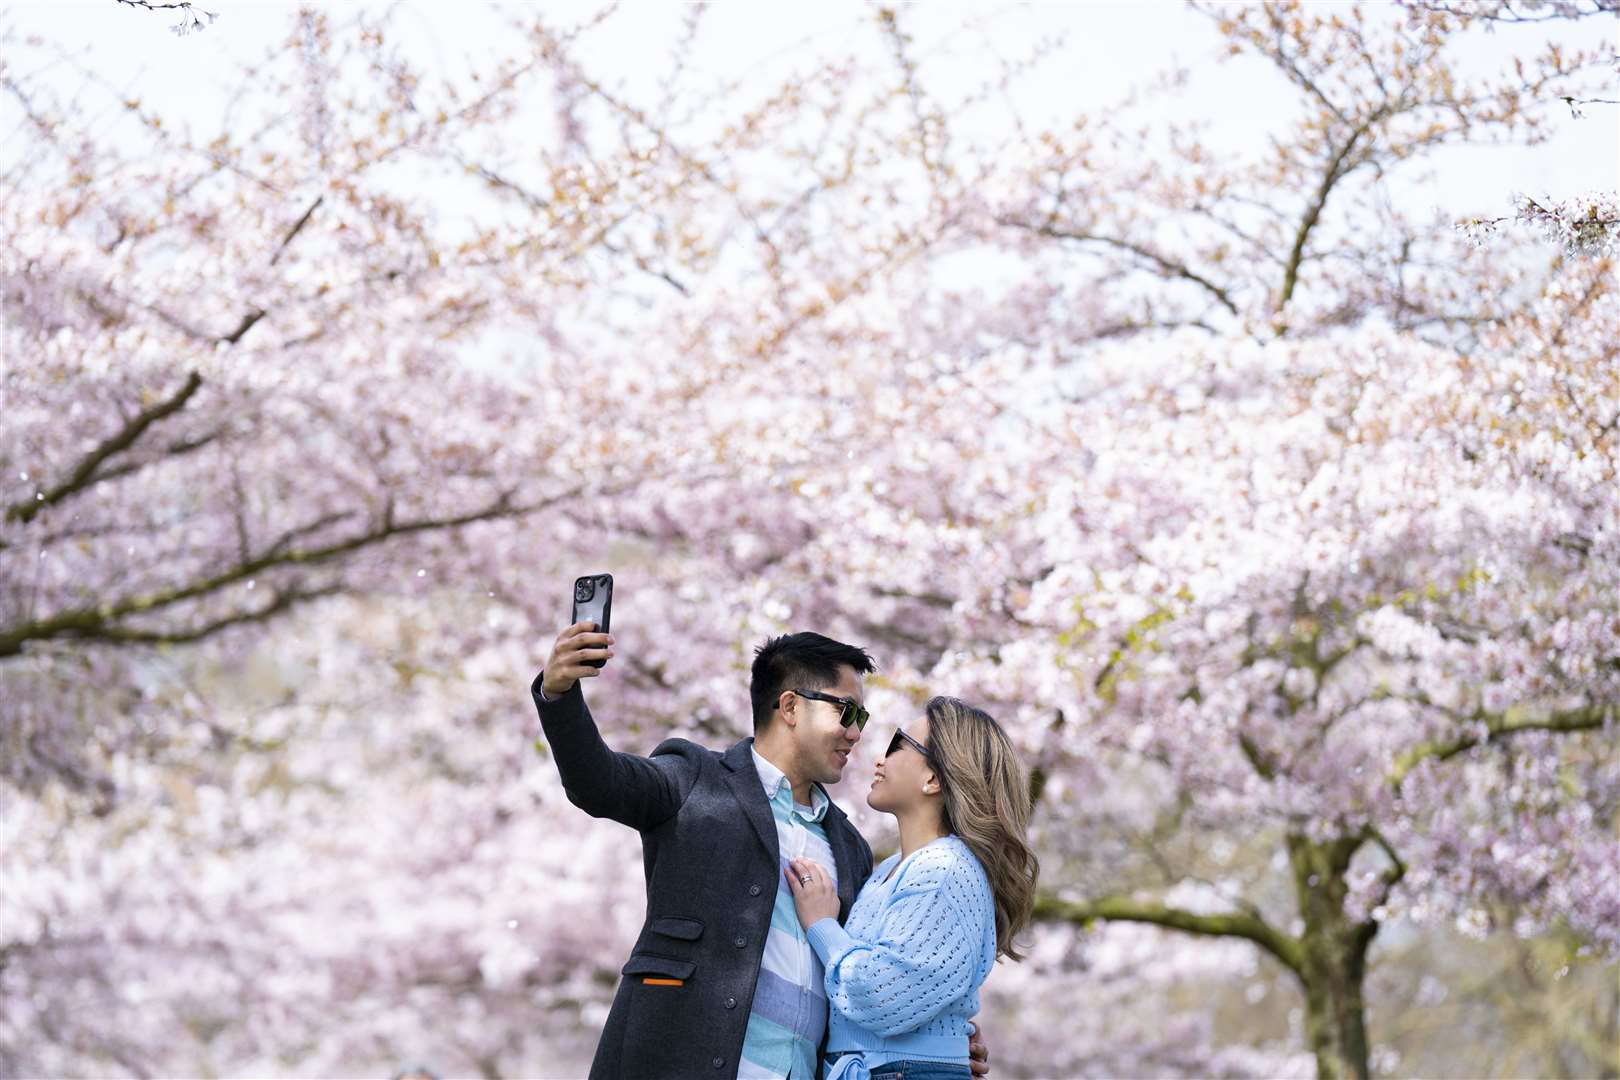 A couple take a selfie with cherry blossom trees in Battersea Park in south-west London (Kirsty O’Connor/PA)